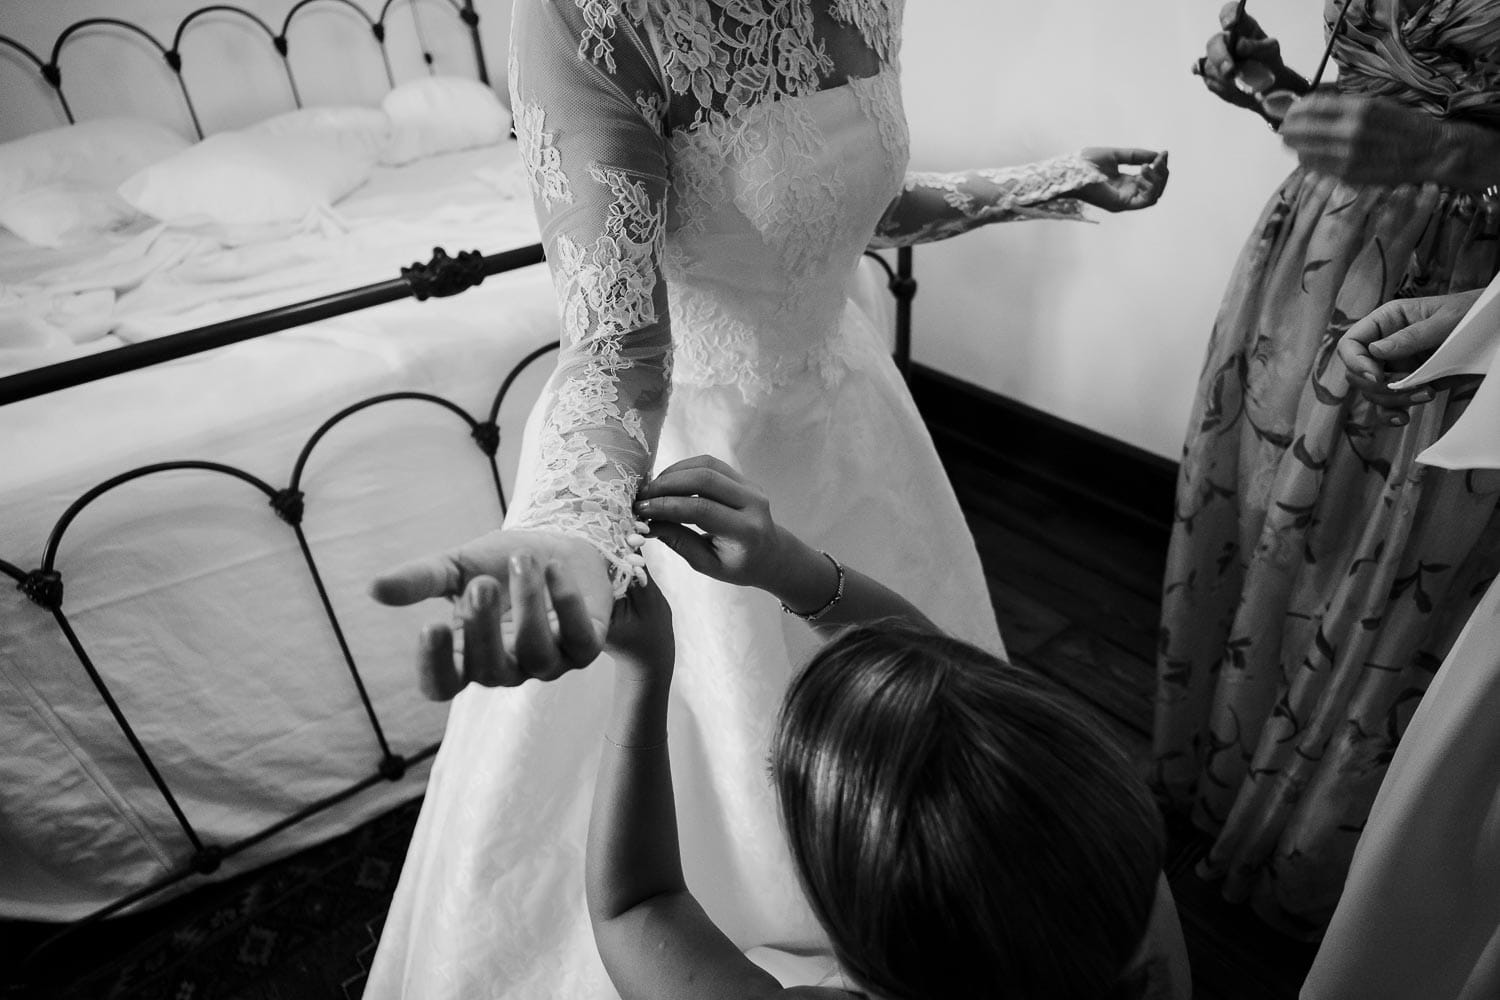 The bride has help from bridesmaid as she gets ready